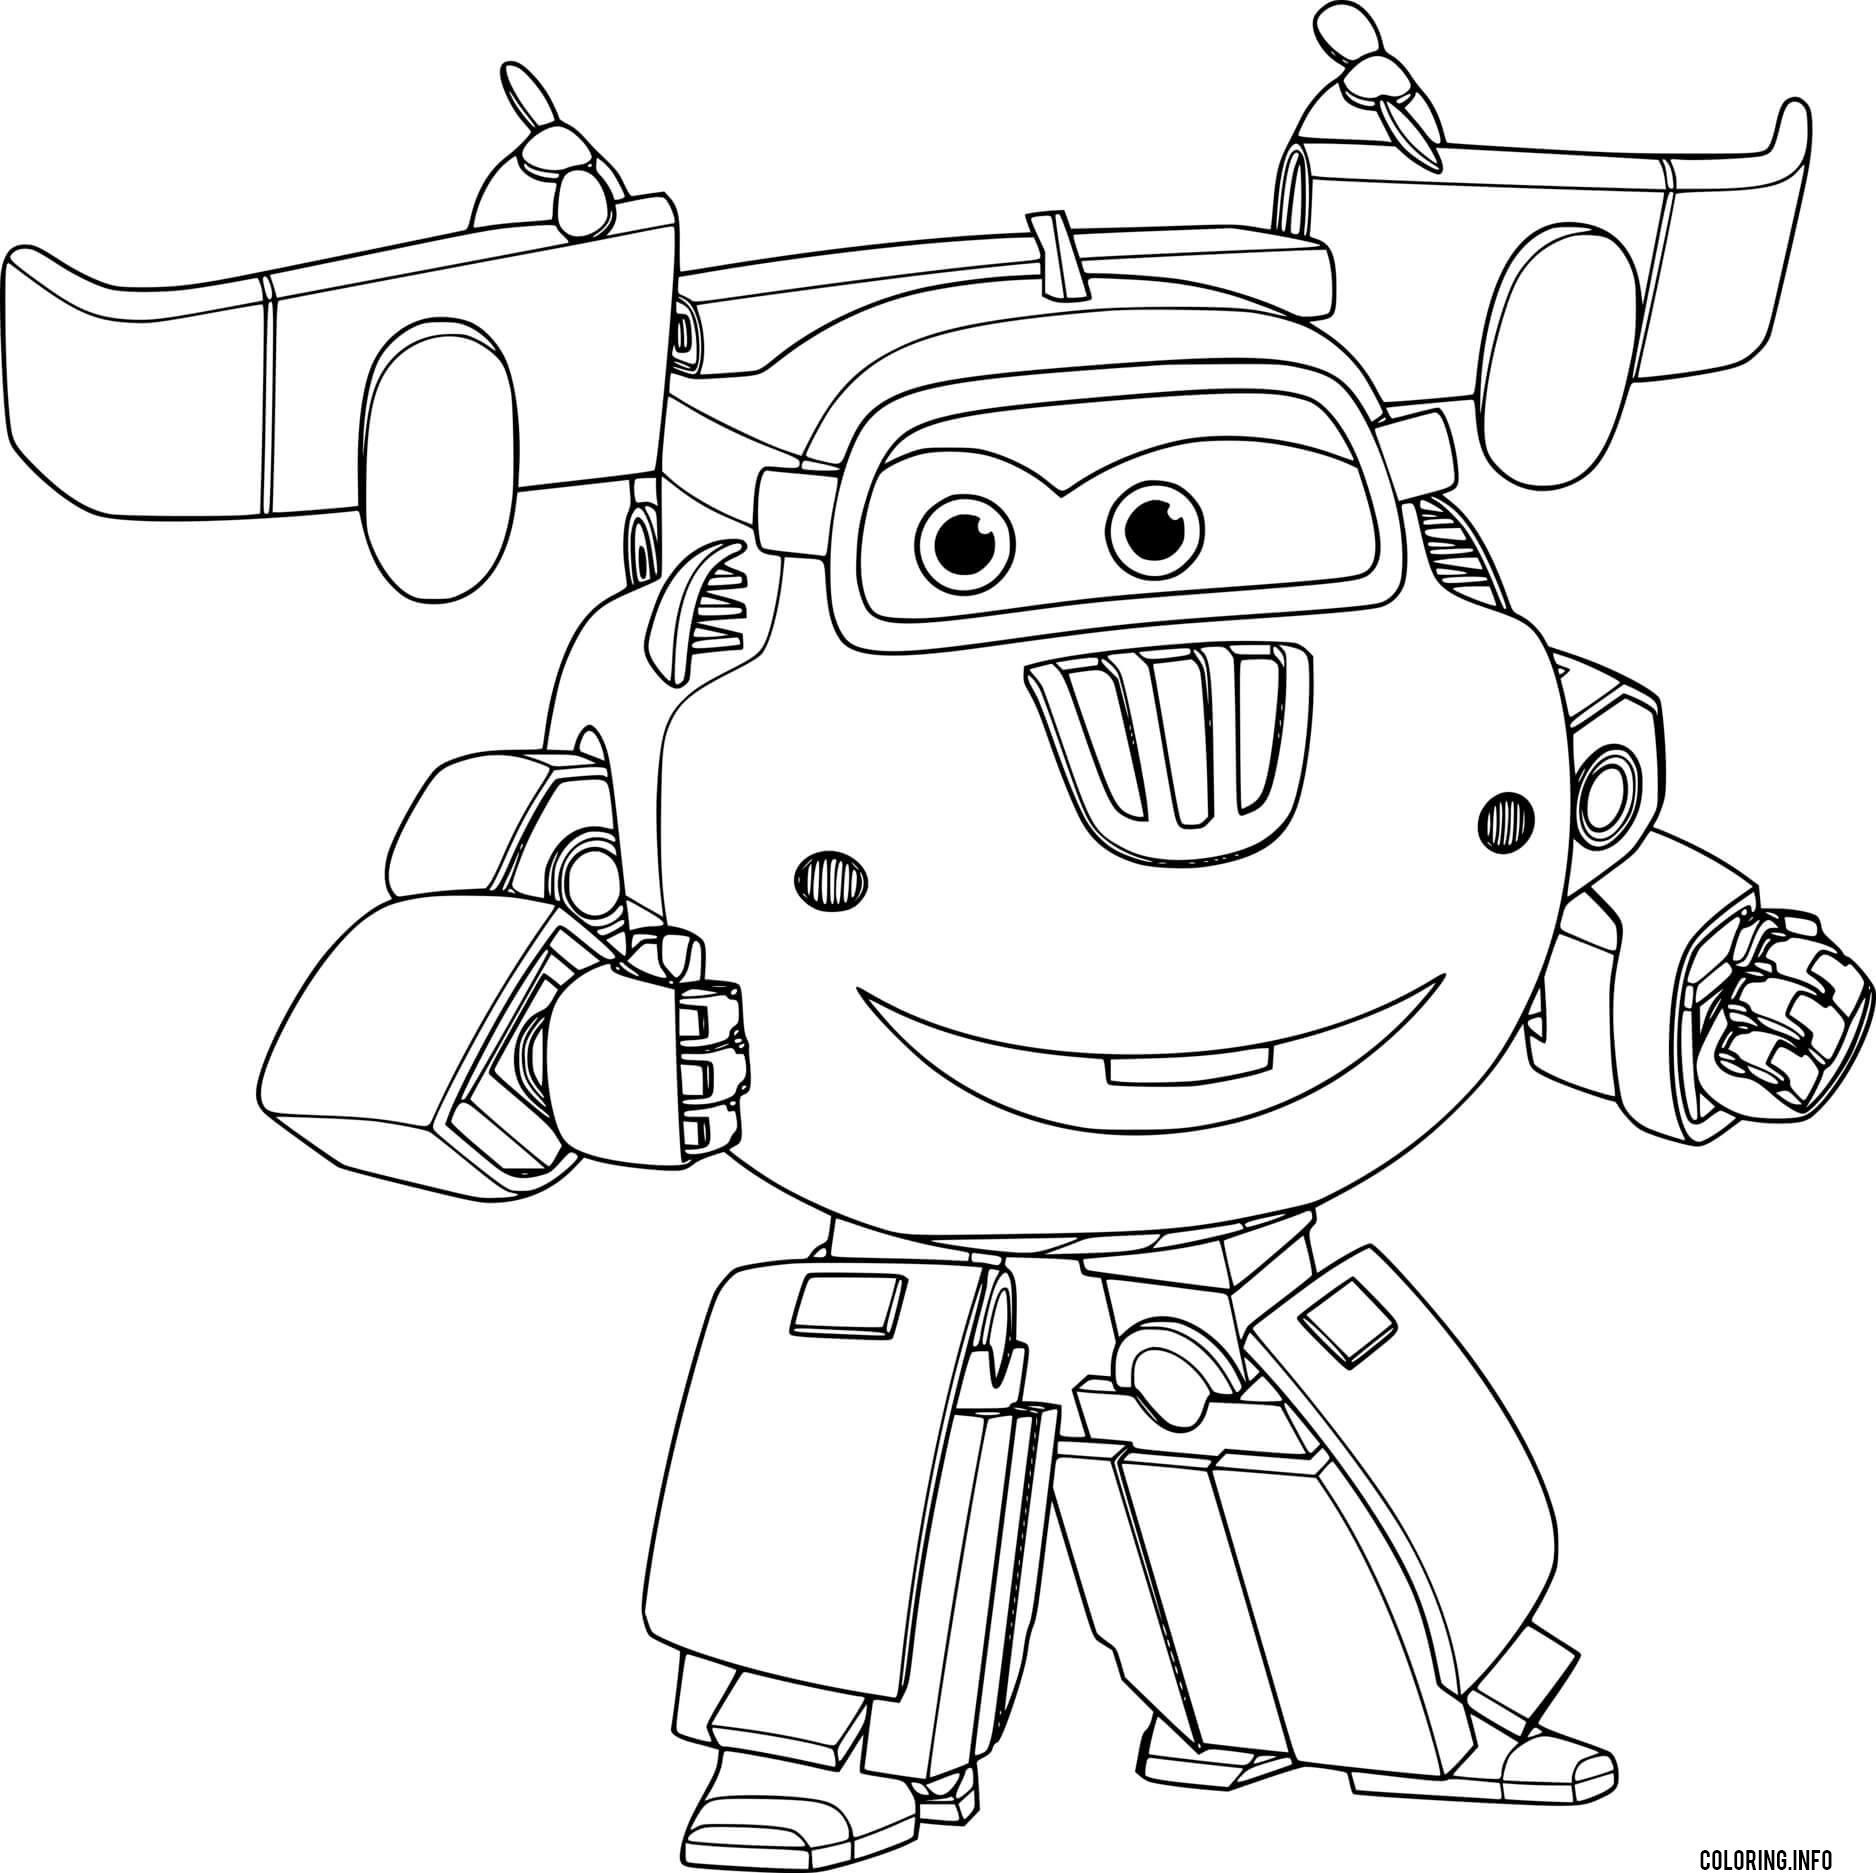 Super Wings Donnie Is Ready coloring